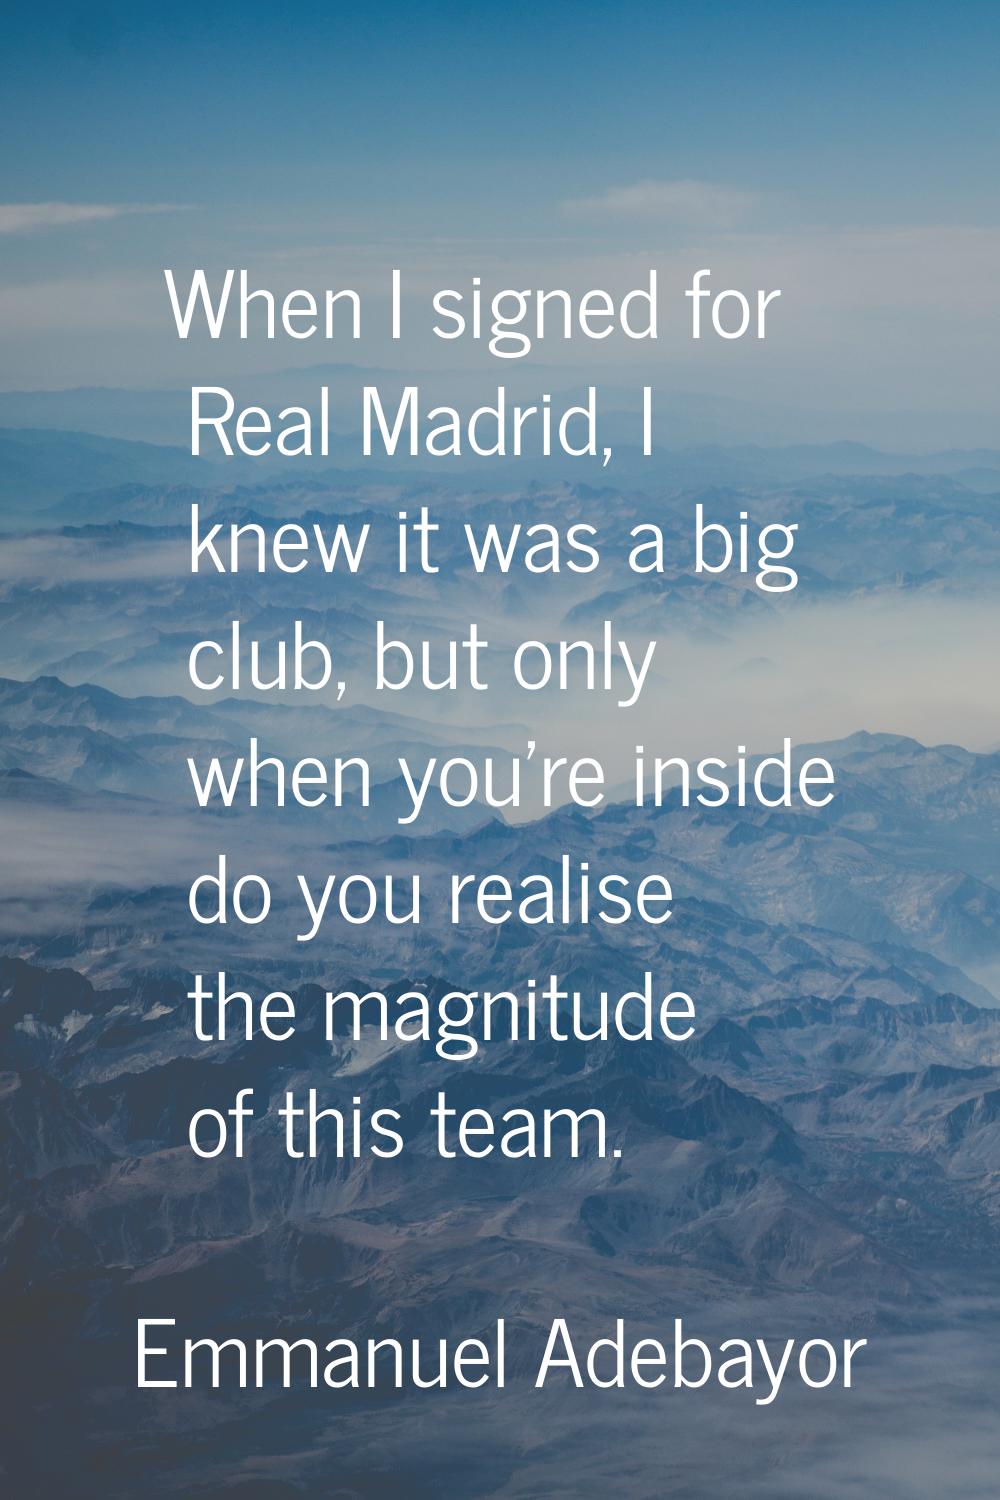 When I signed for Real Madrid, I knew it was a big club, but only when you're inside do you realise